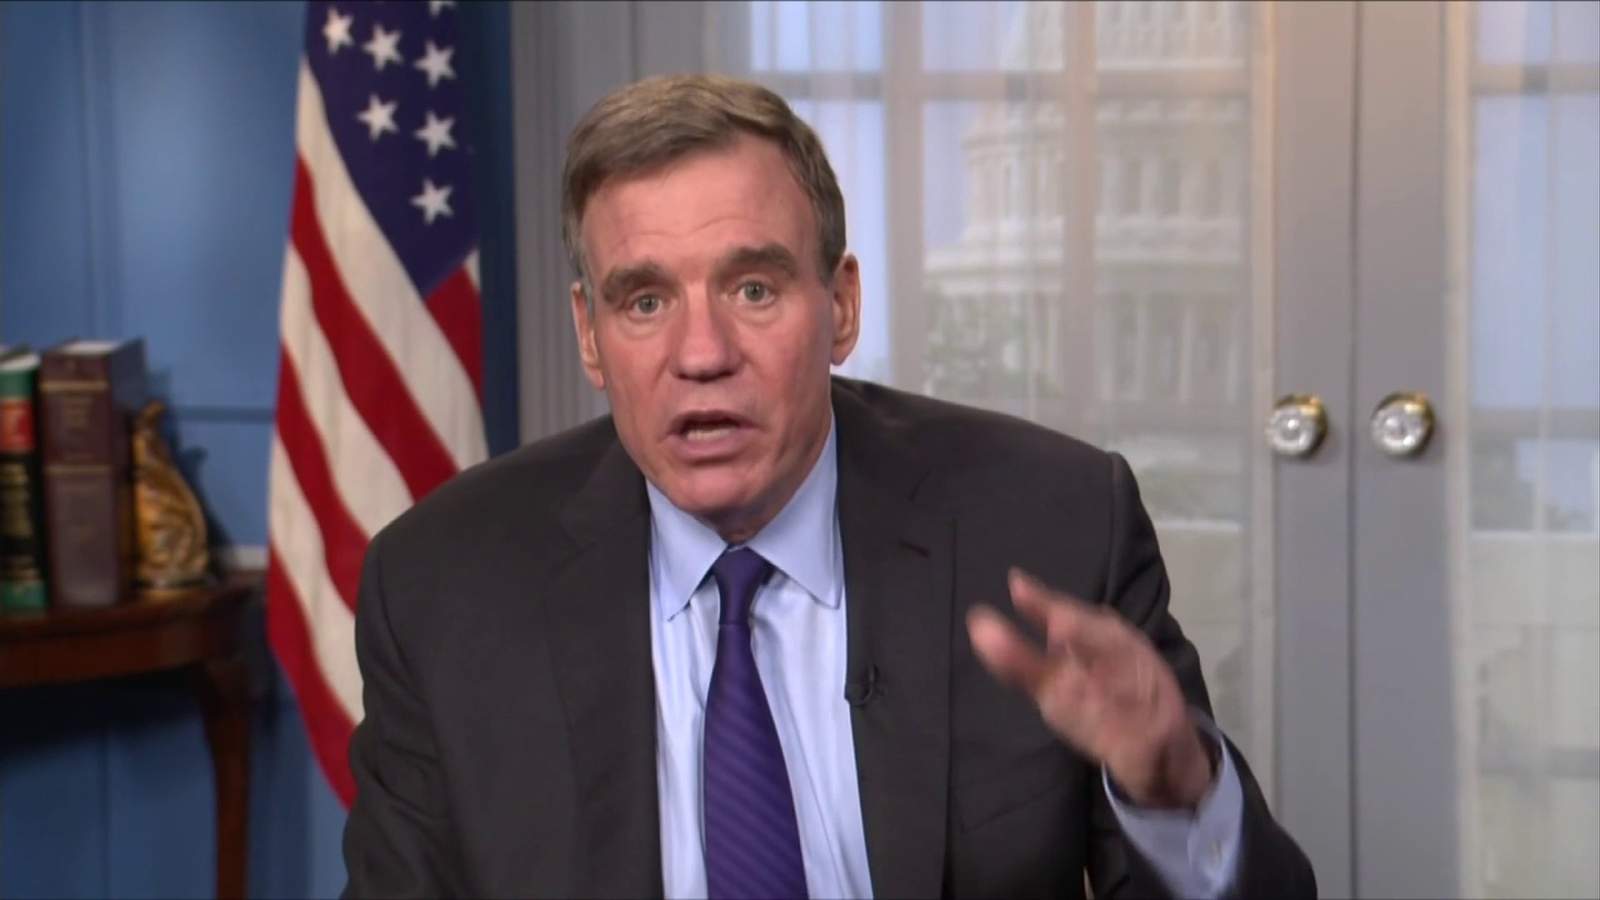 Sen. Mark Warner discusses affordable housing, Capitol riot during news conference